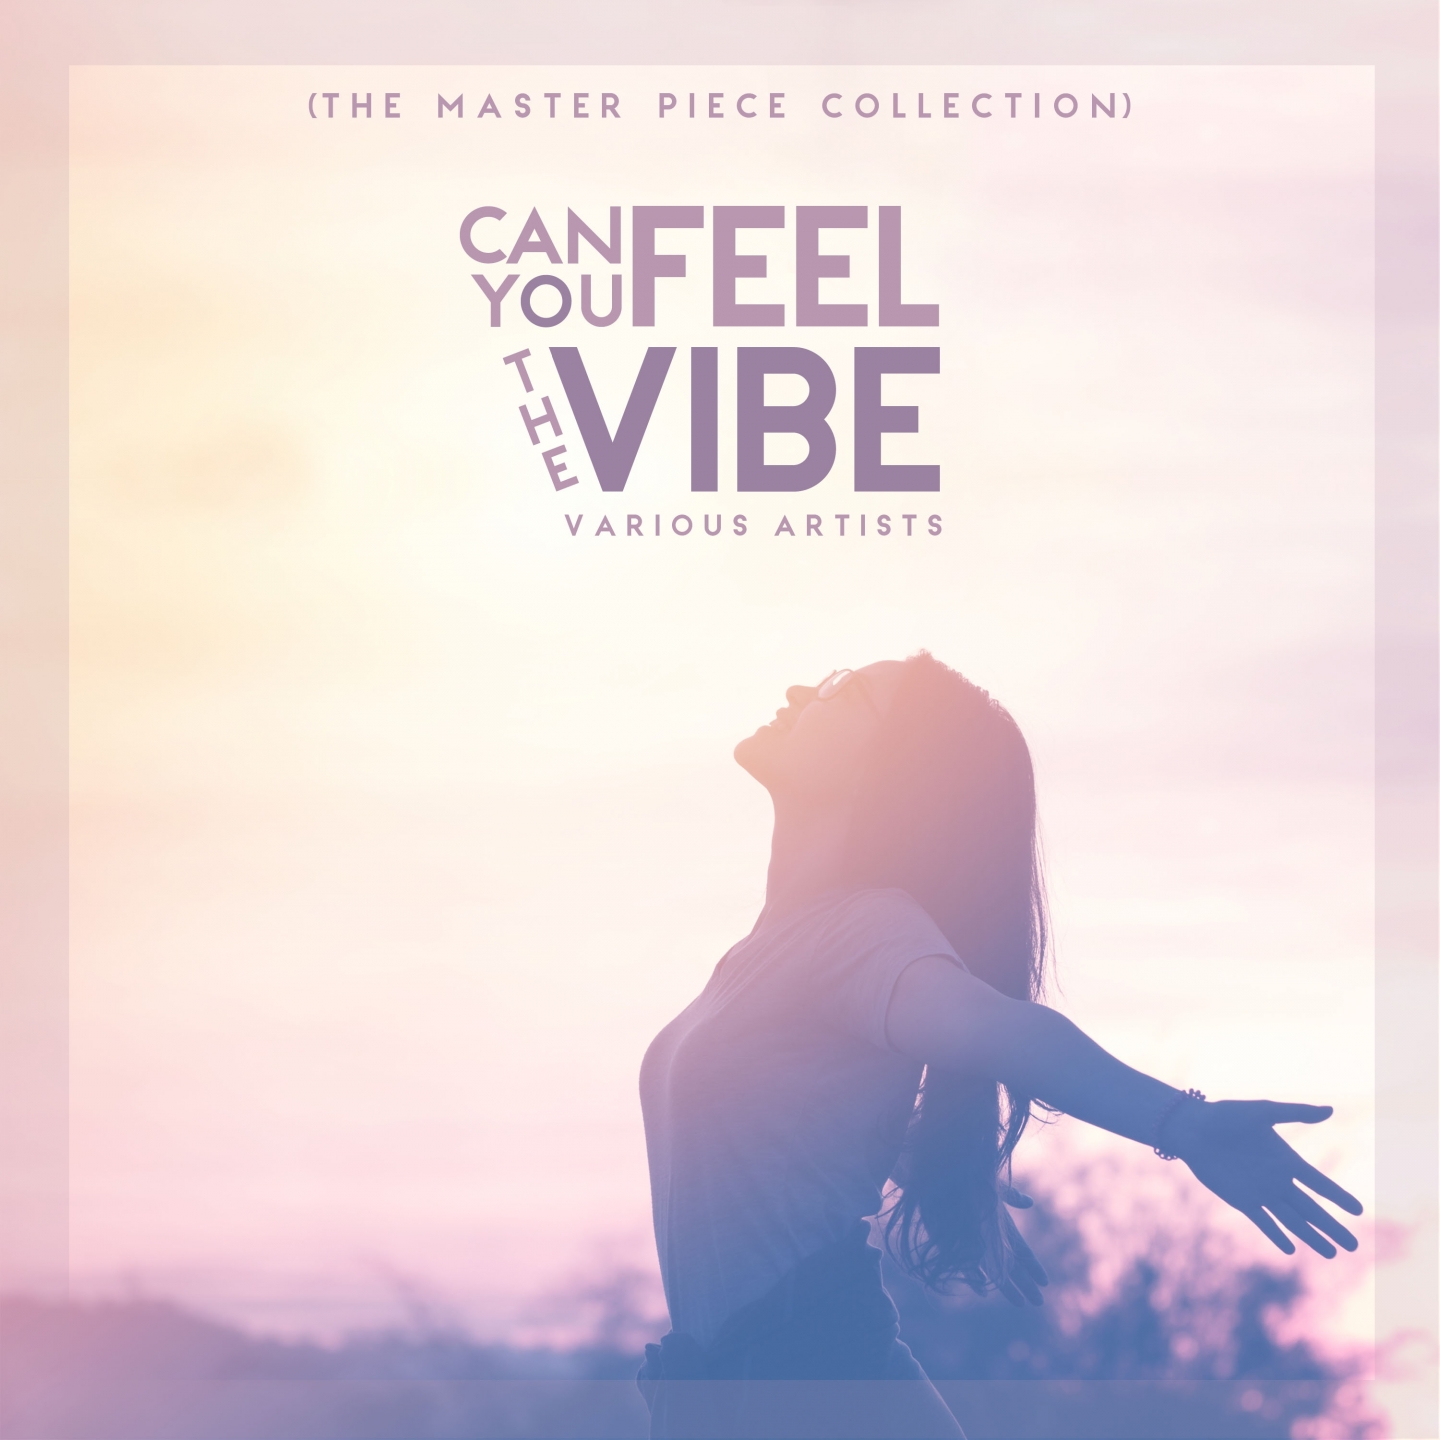 VA - Can You Feel the Vibe (The Master Piece Collection) / Always There